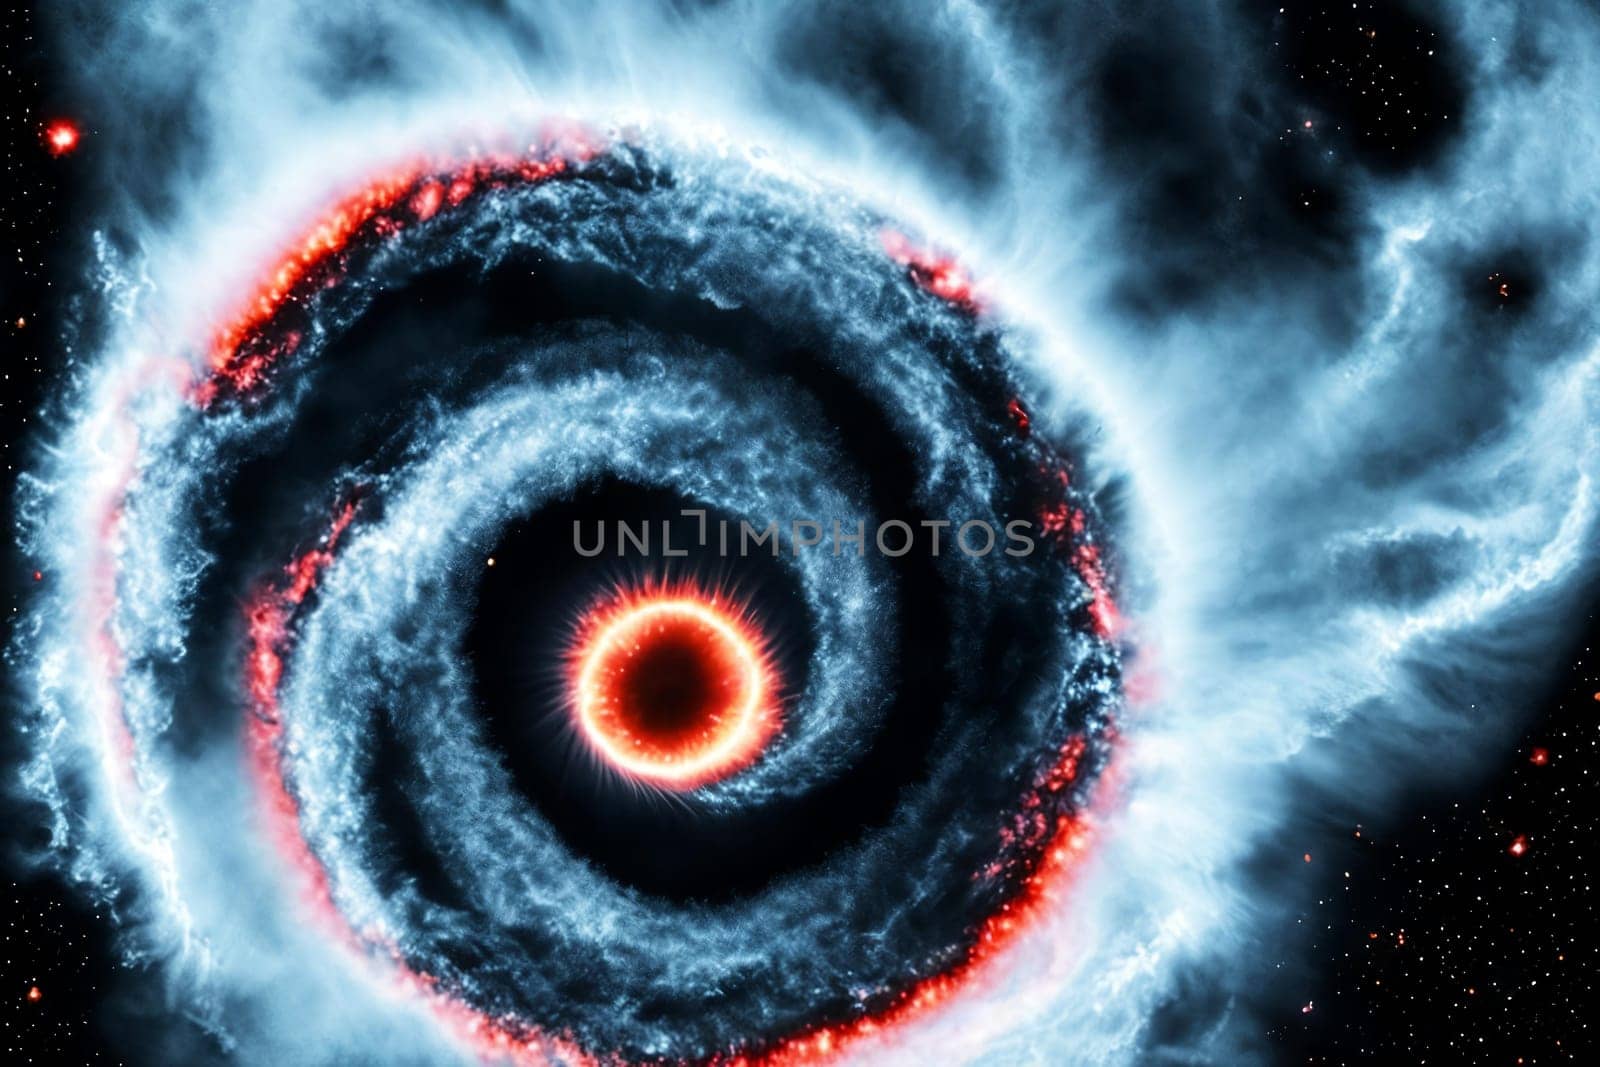 A mesmerizing illustration of a black hole in space by GoodOlga